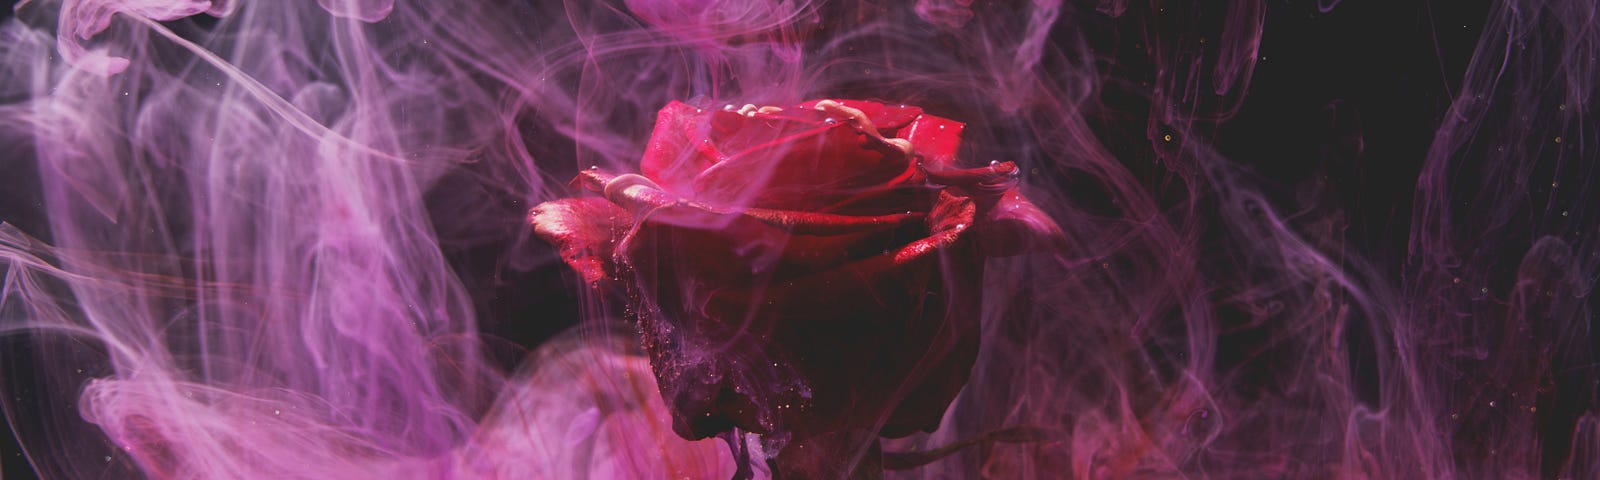 Red rose surrounded by pink smoke